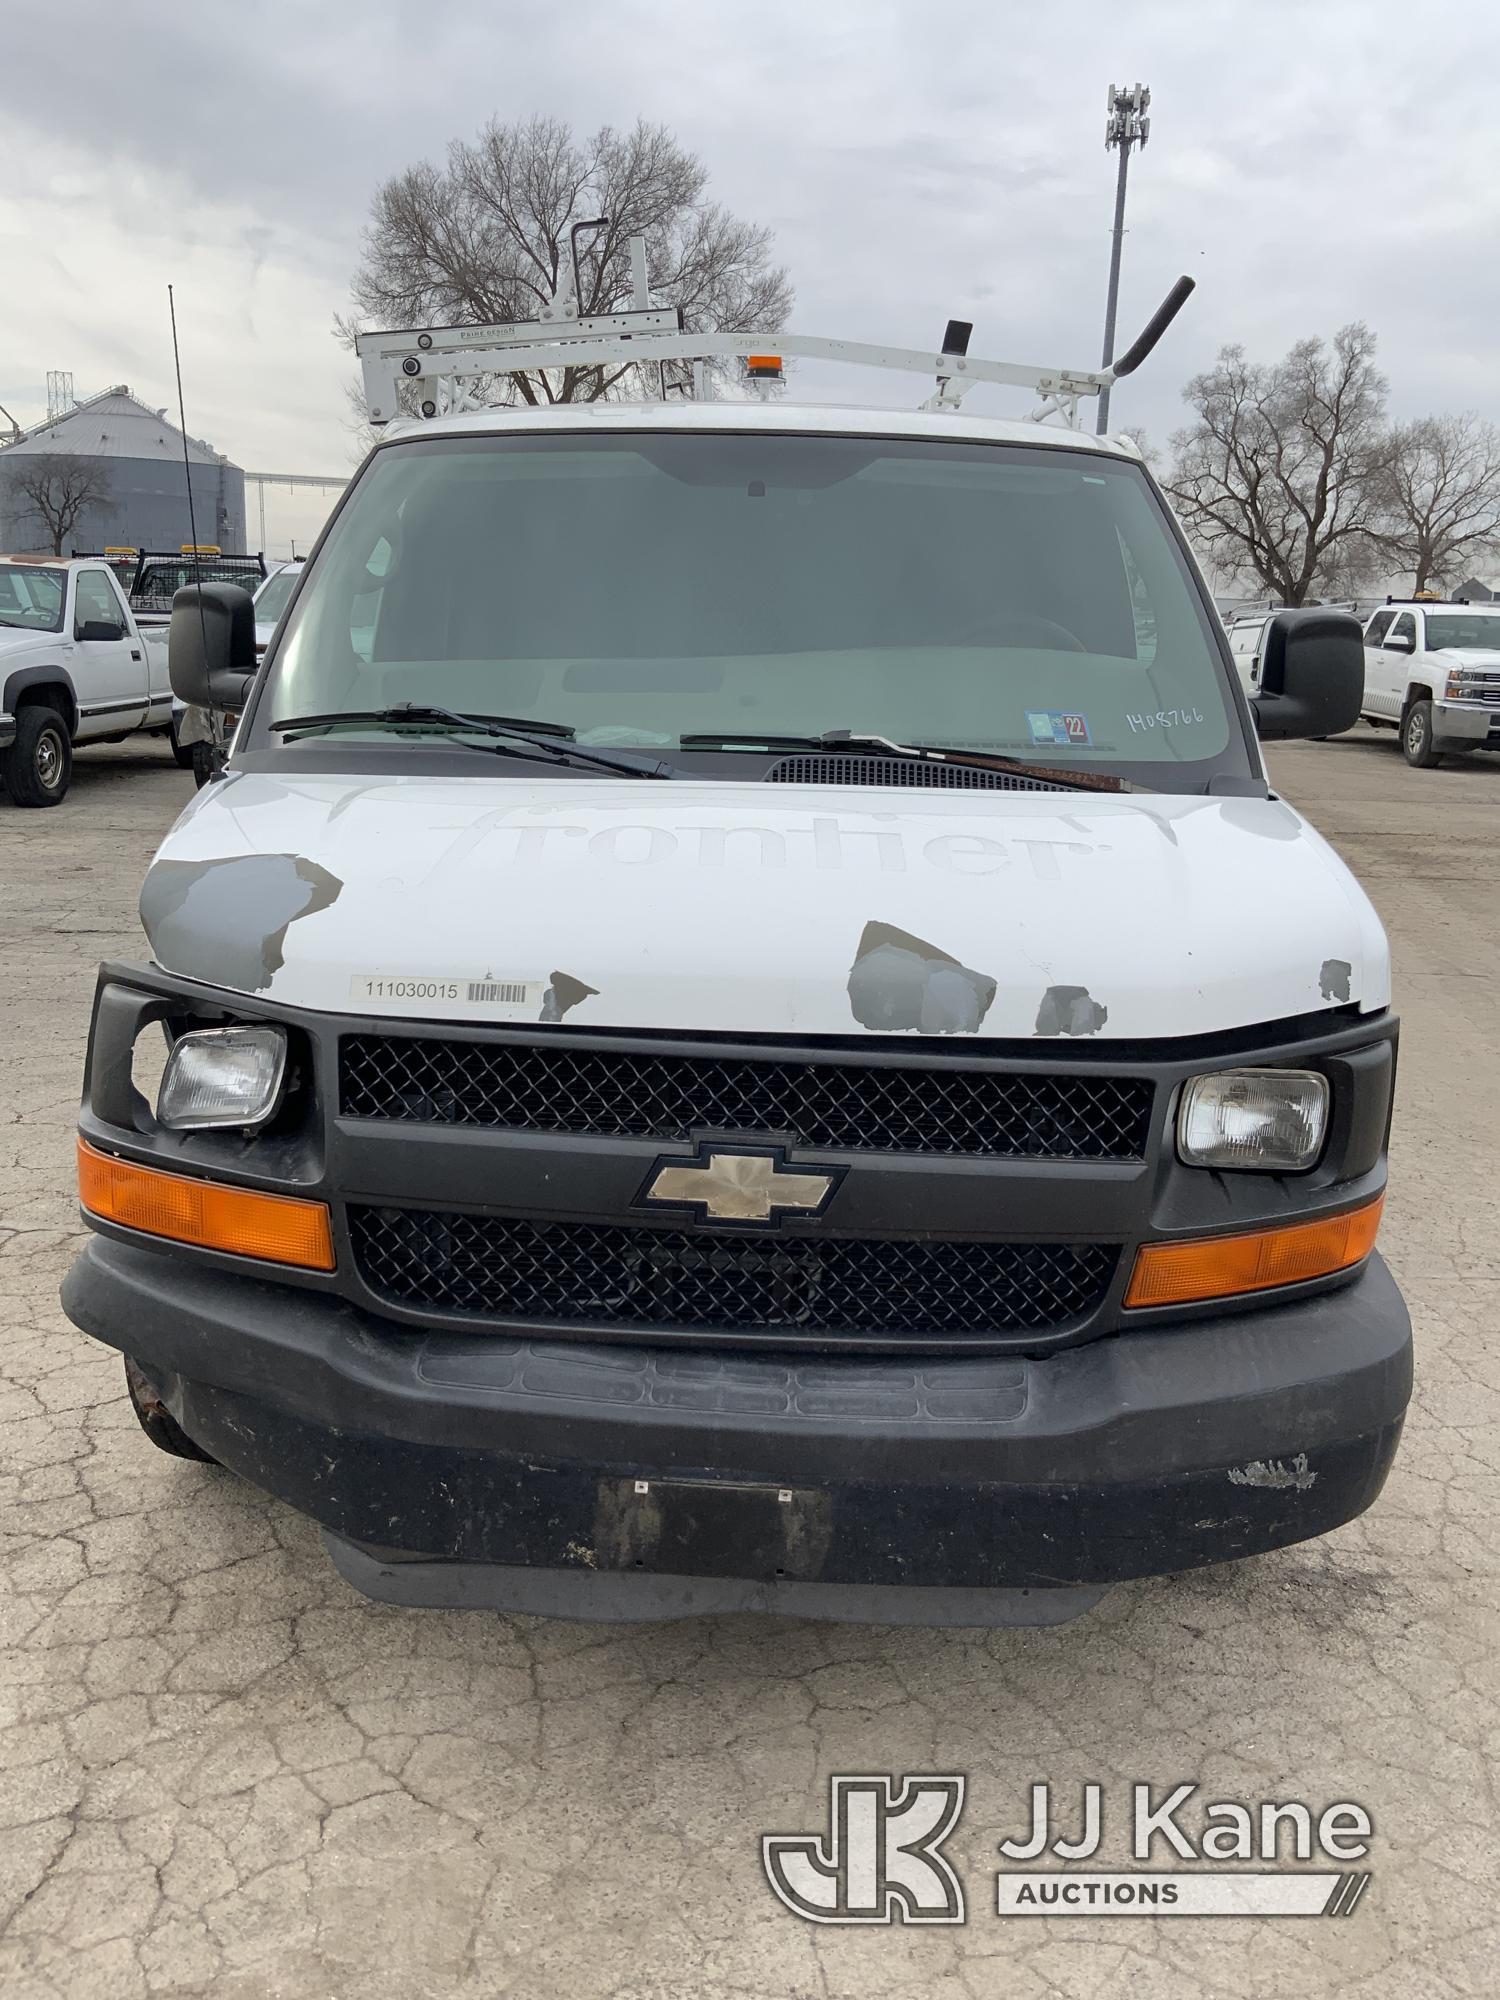 (South Beloit, IL) 2010 Chevrolet Express G2500 Cargo Van Wrecked-Front End Damaged-Right Wheel Not